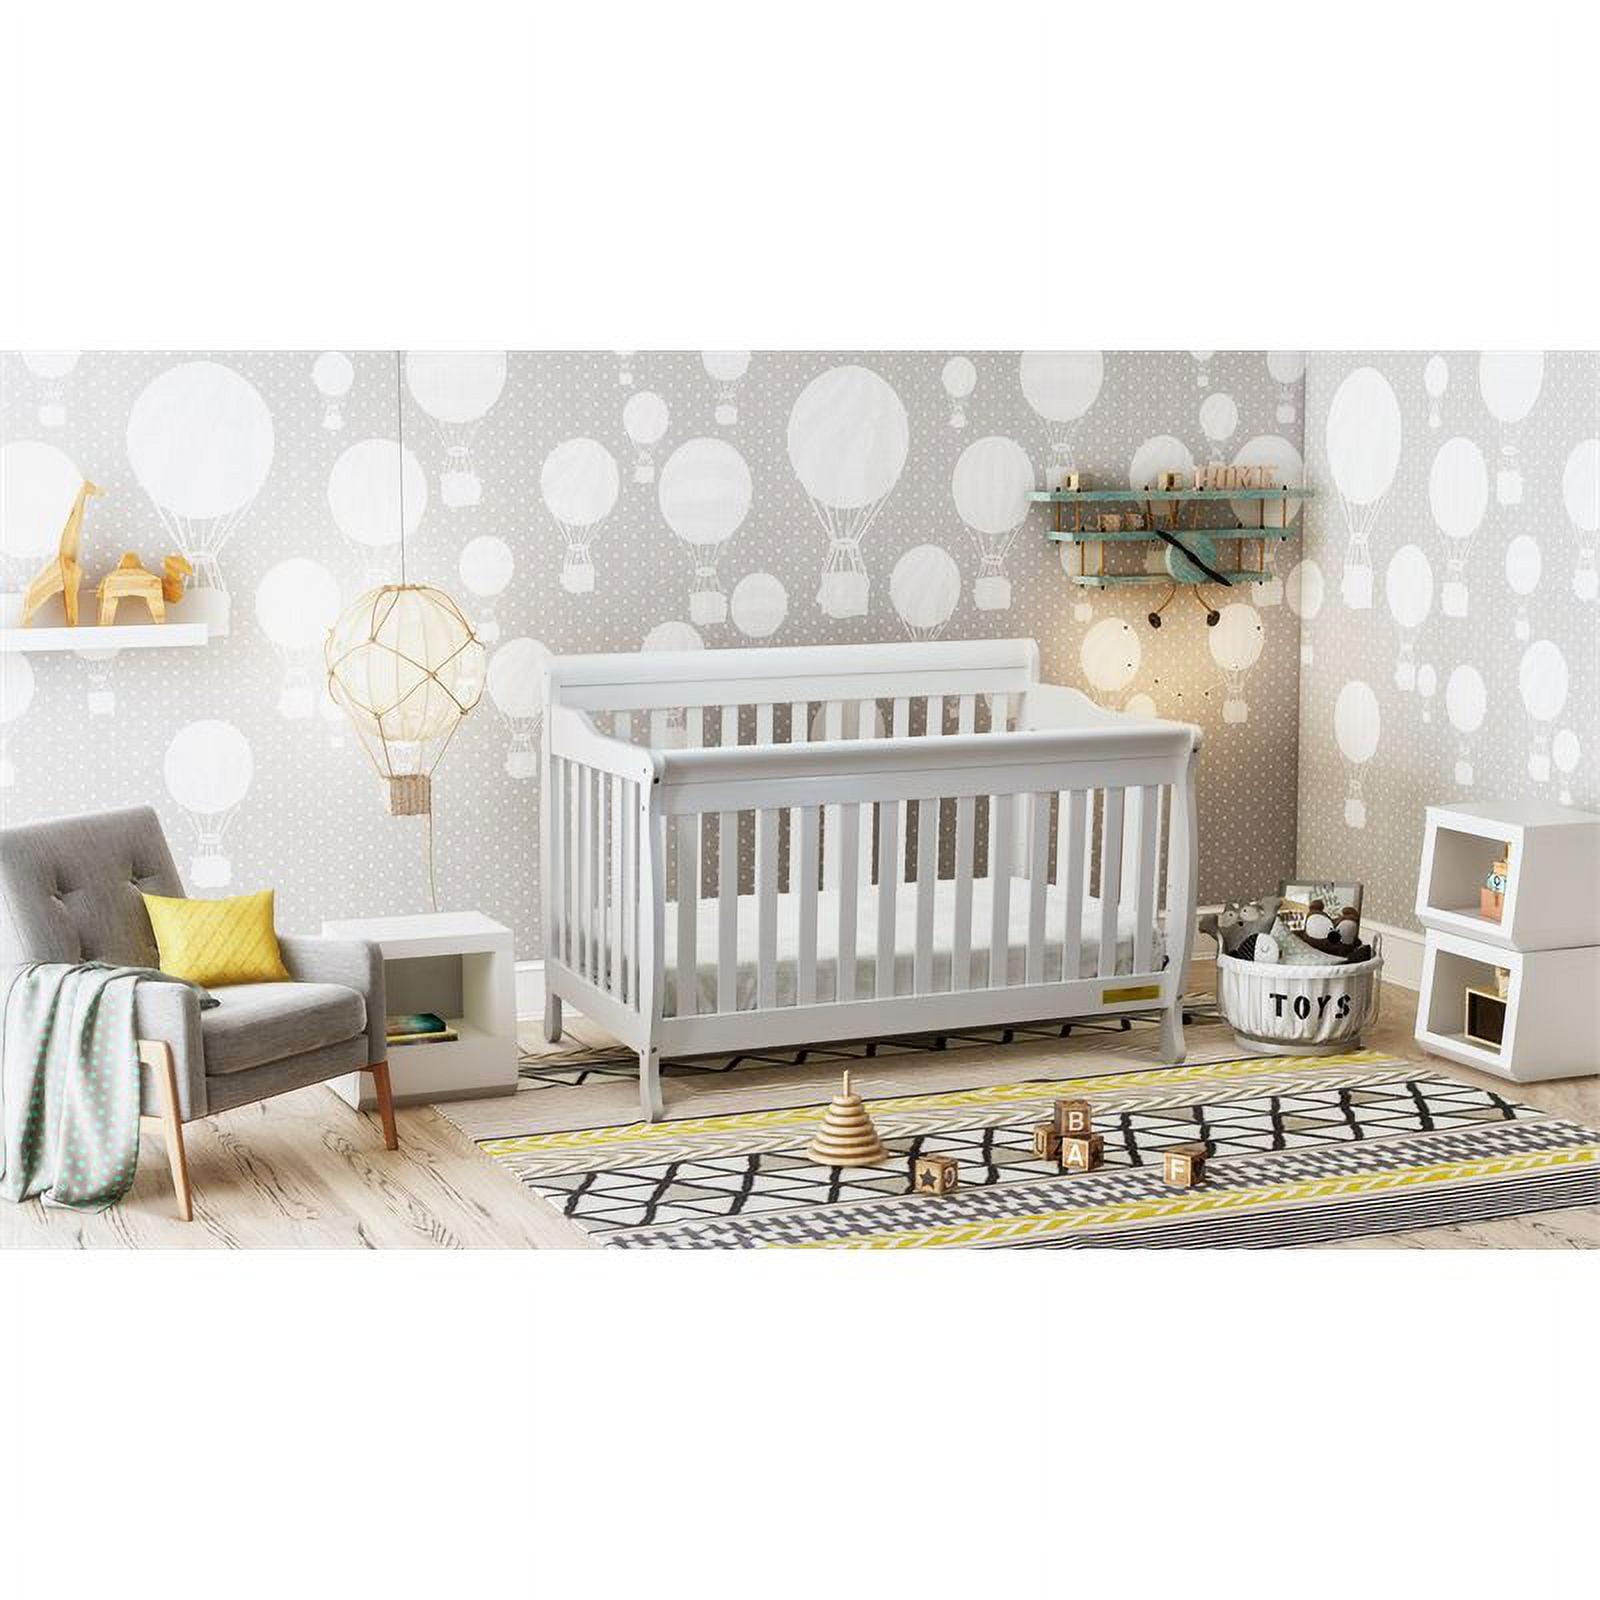 Athena Alice 4 in 1 White Convertible Wood Crib with Guardrail